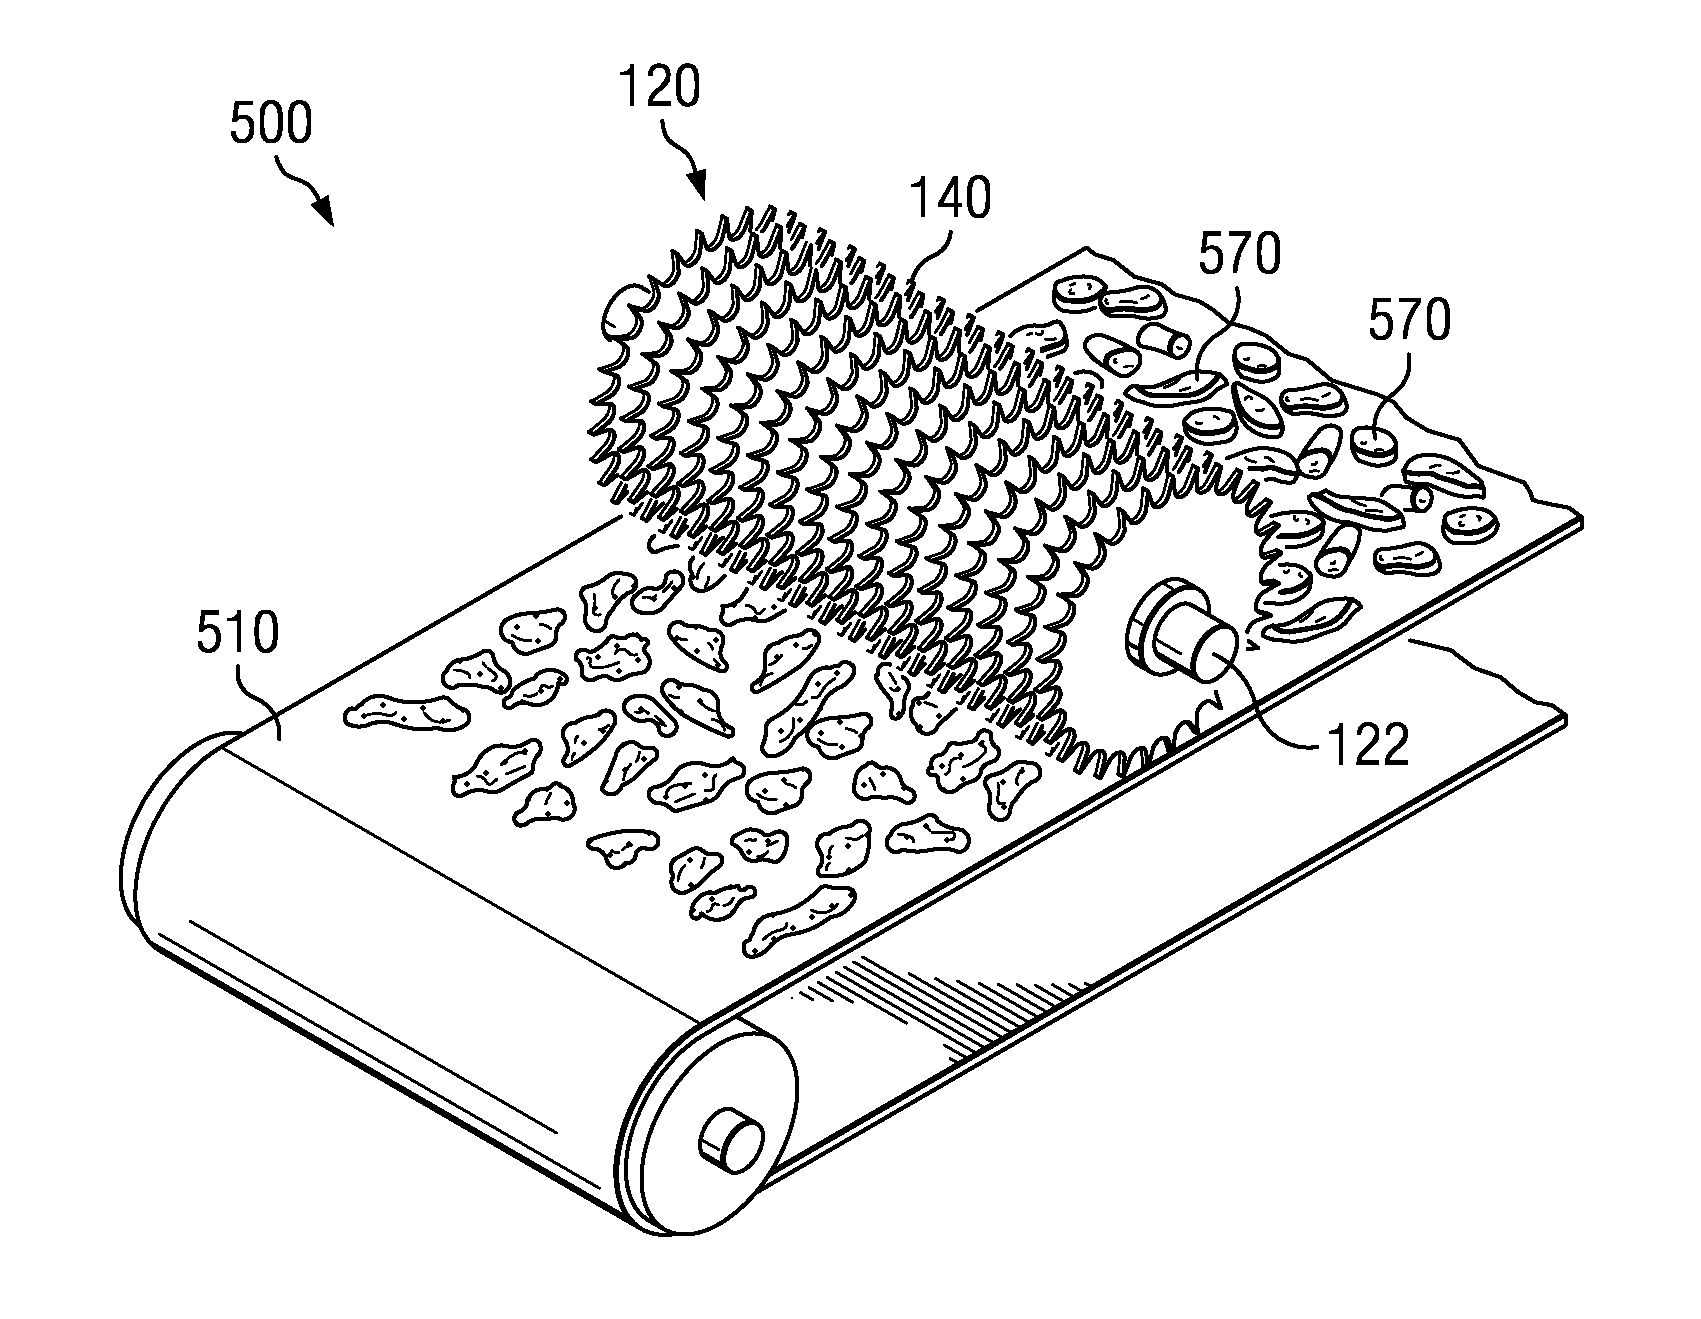 Apparatus and Method for Perforation of Fruits and Vegetables